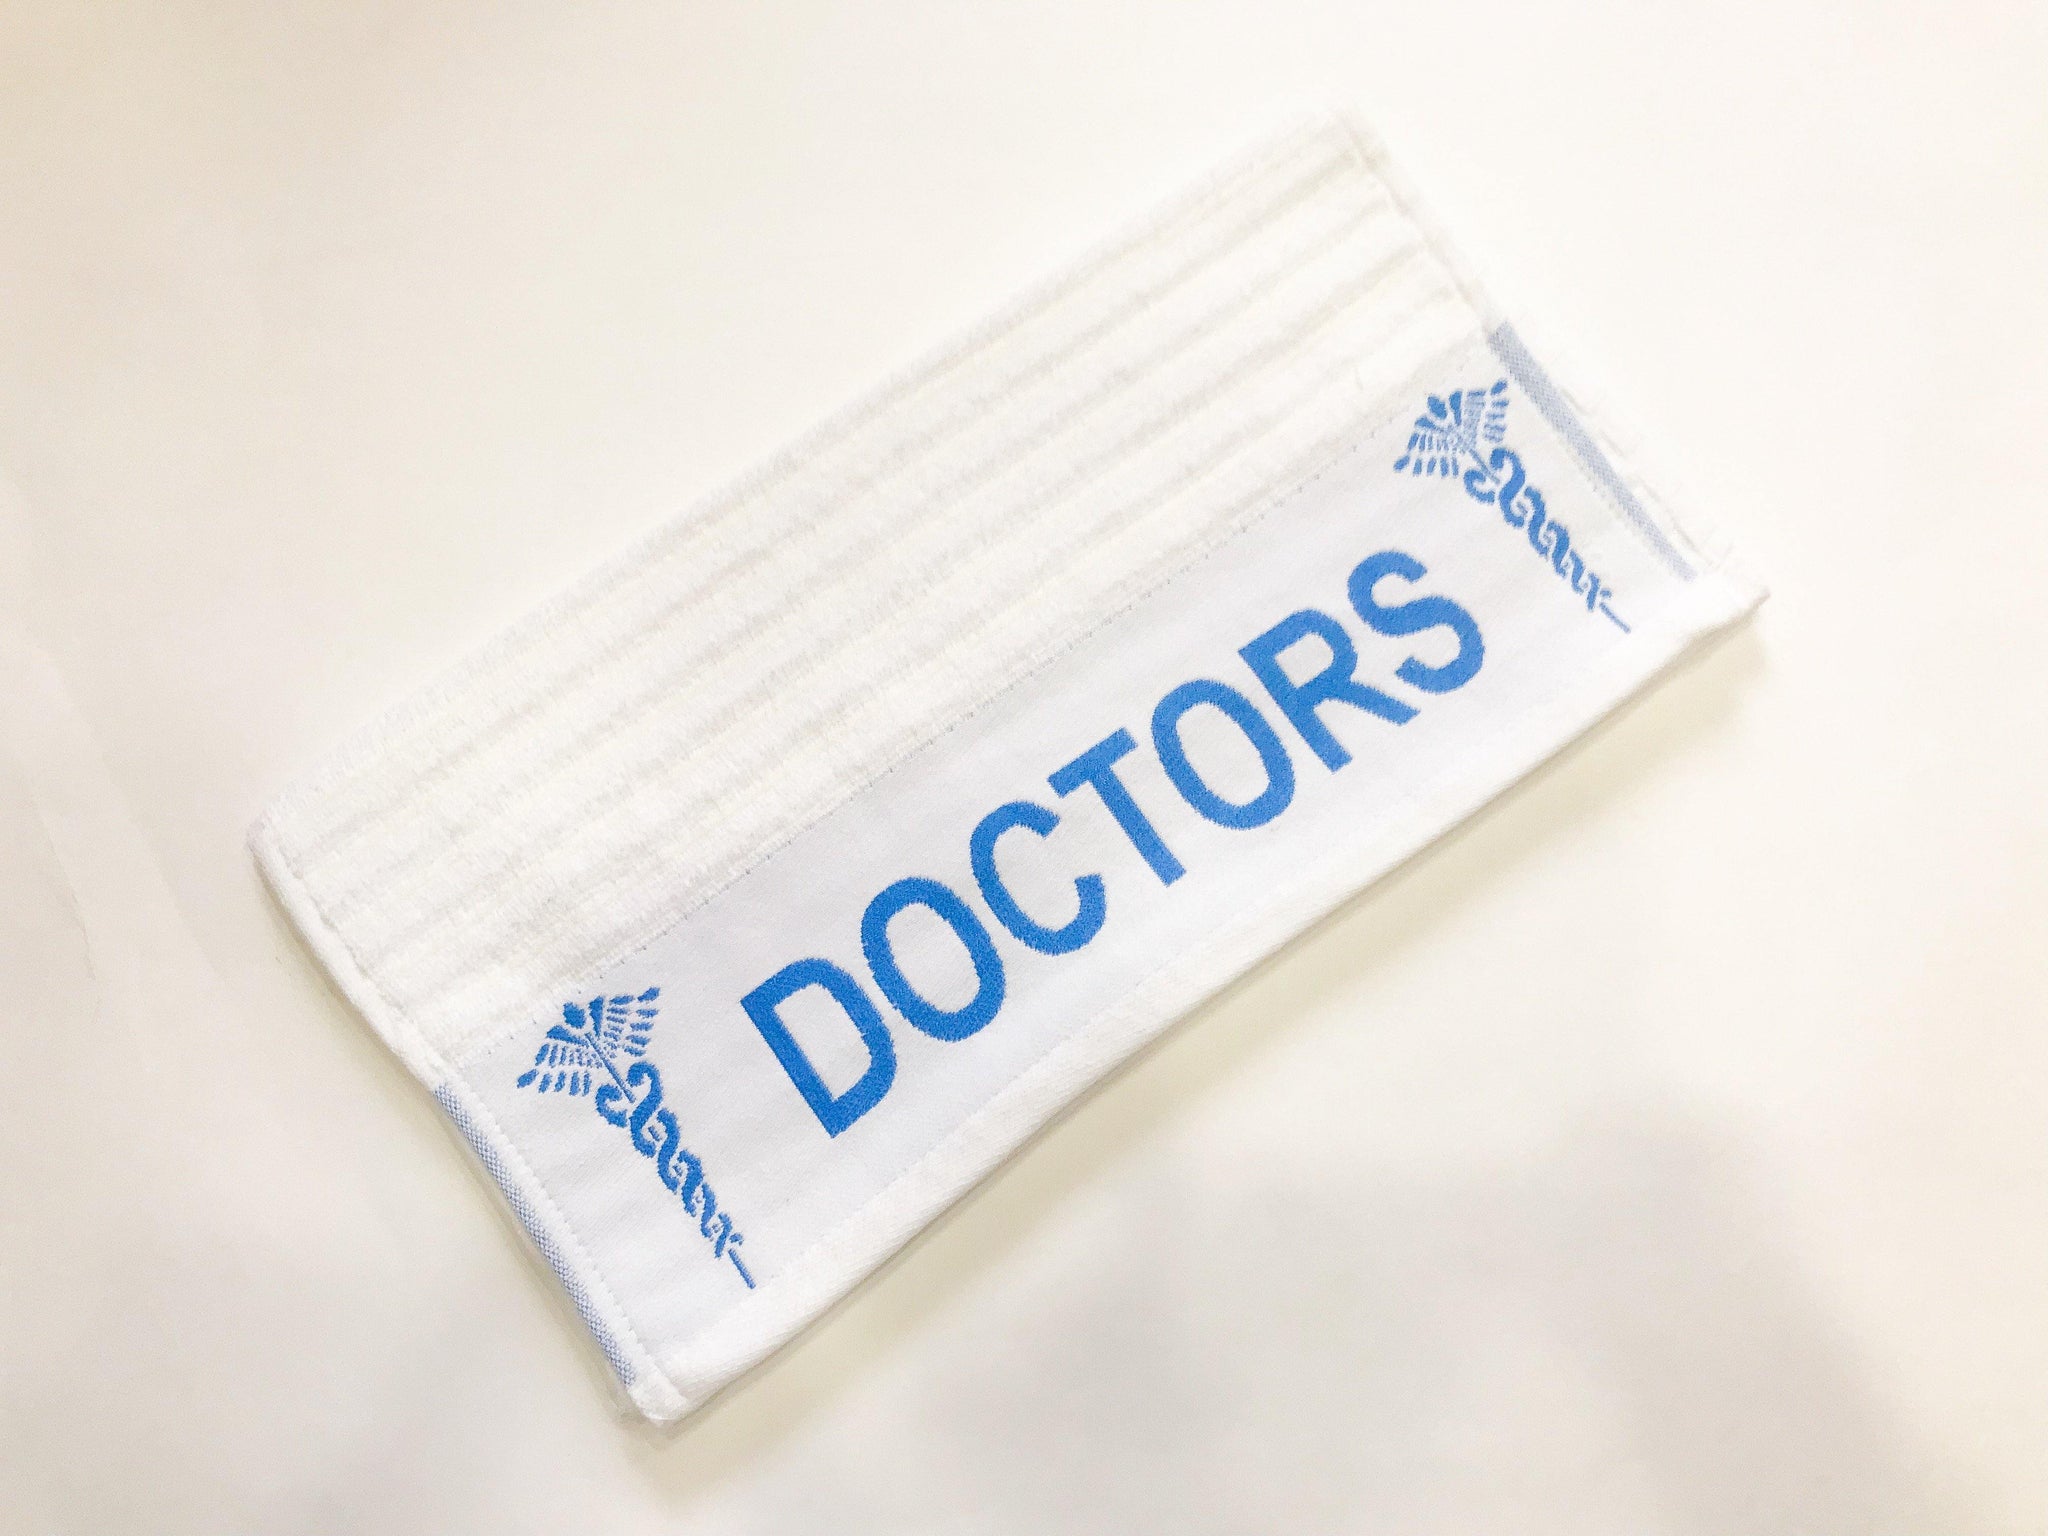 Lushomes White With Blue Border 100 % cotton super Absorbant Doctor Towel 40 x 80 cms (16 x 32"•À?, 550 GSM Towel) - Lushomes